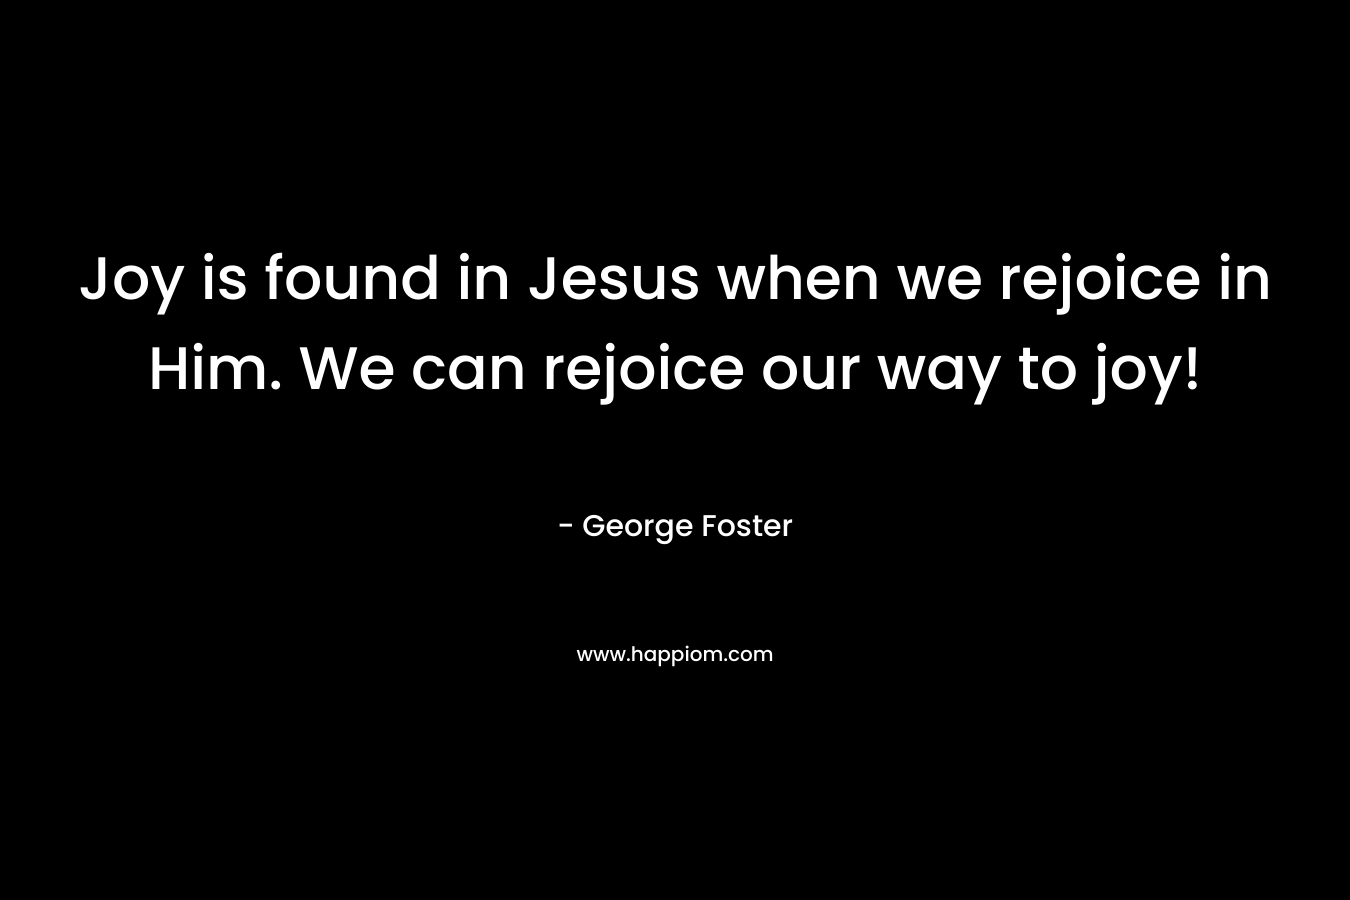 Joy is found in Jesus when we rejoice in Him. We can rejoice our way to joy! – George Foster